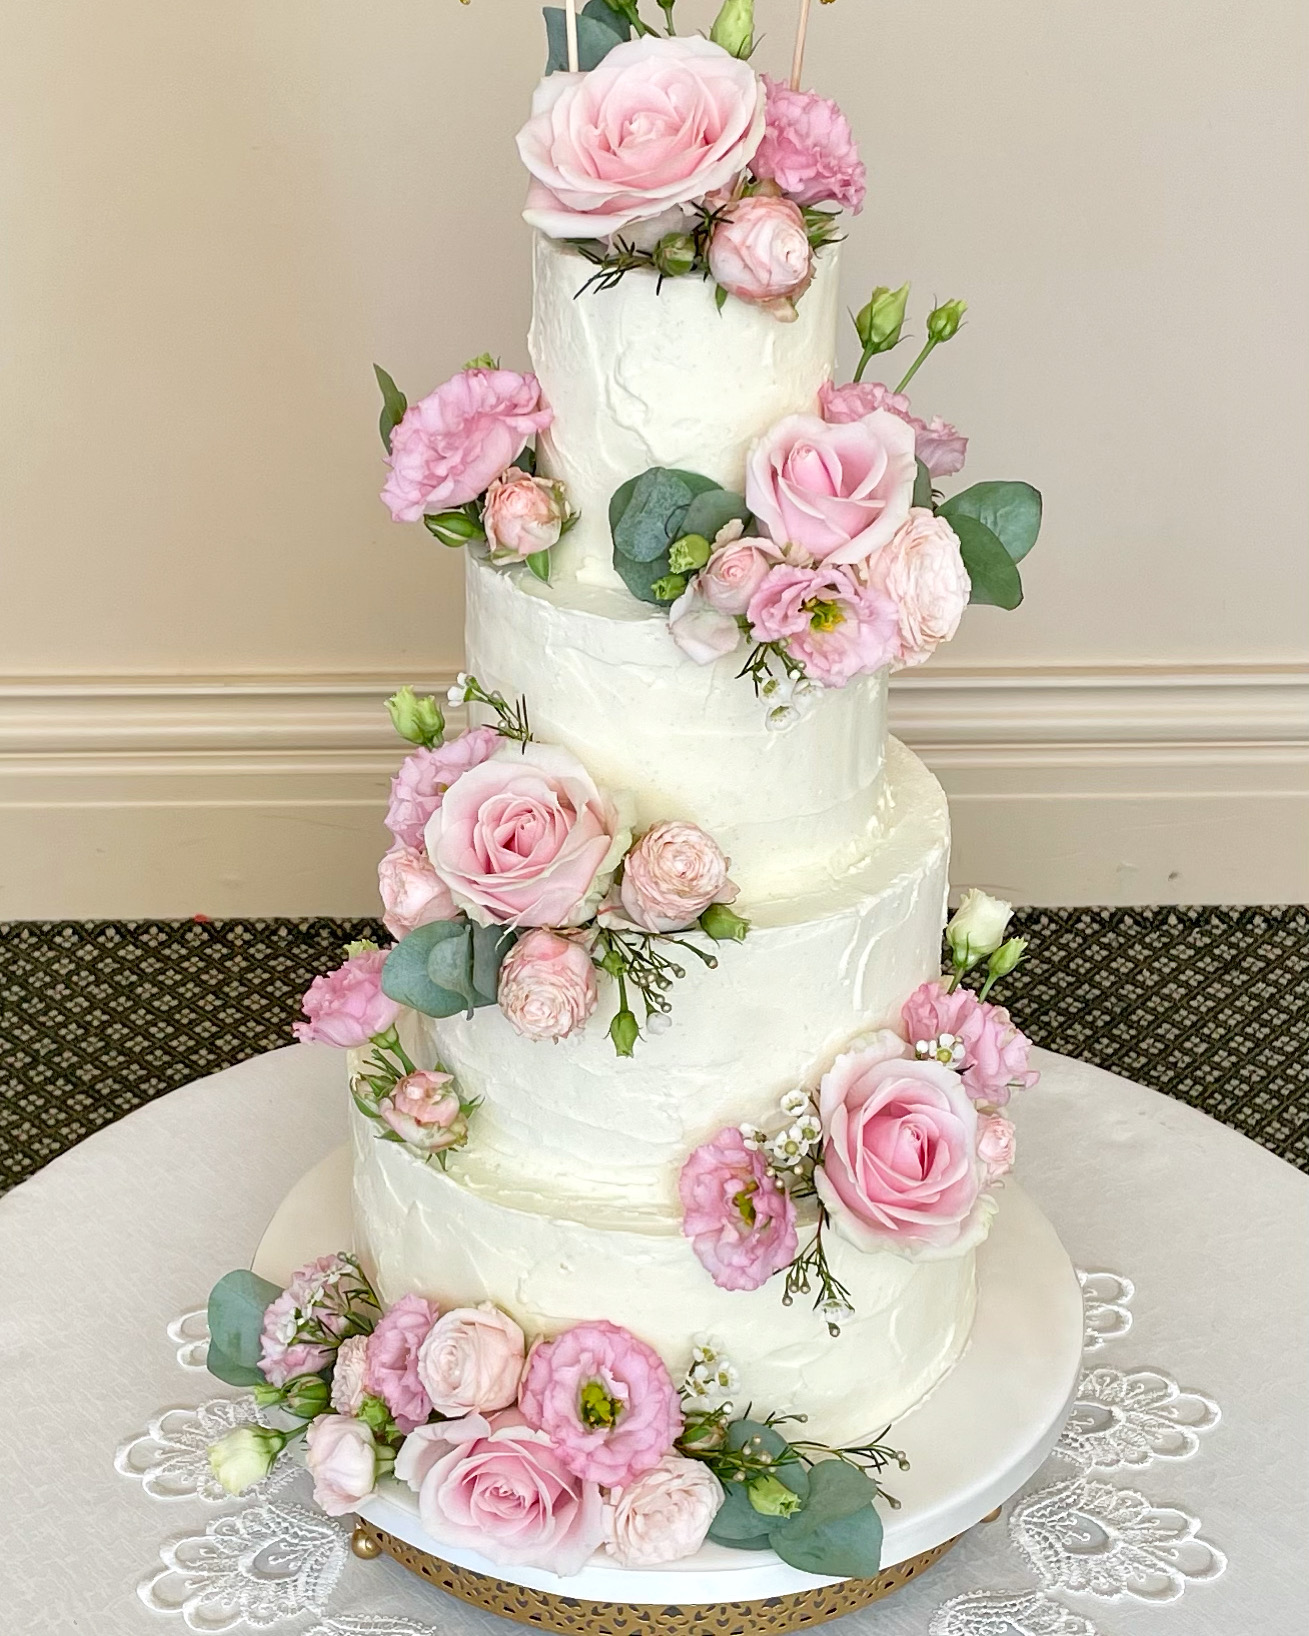 Glorious statement buttercream wedding displayed at The Lawn